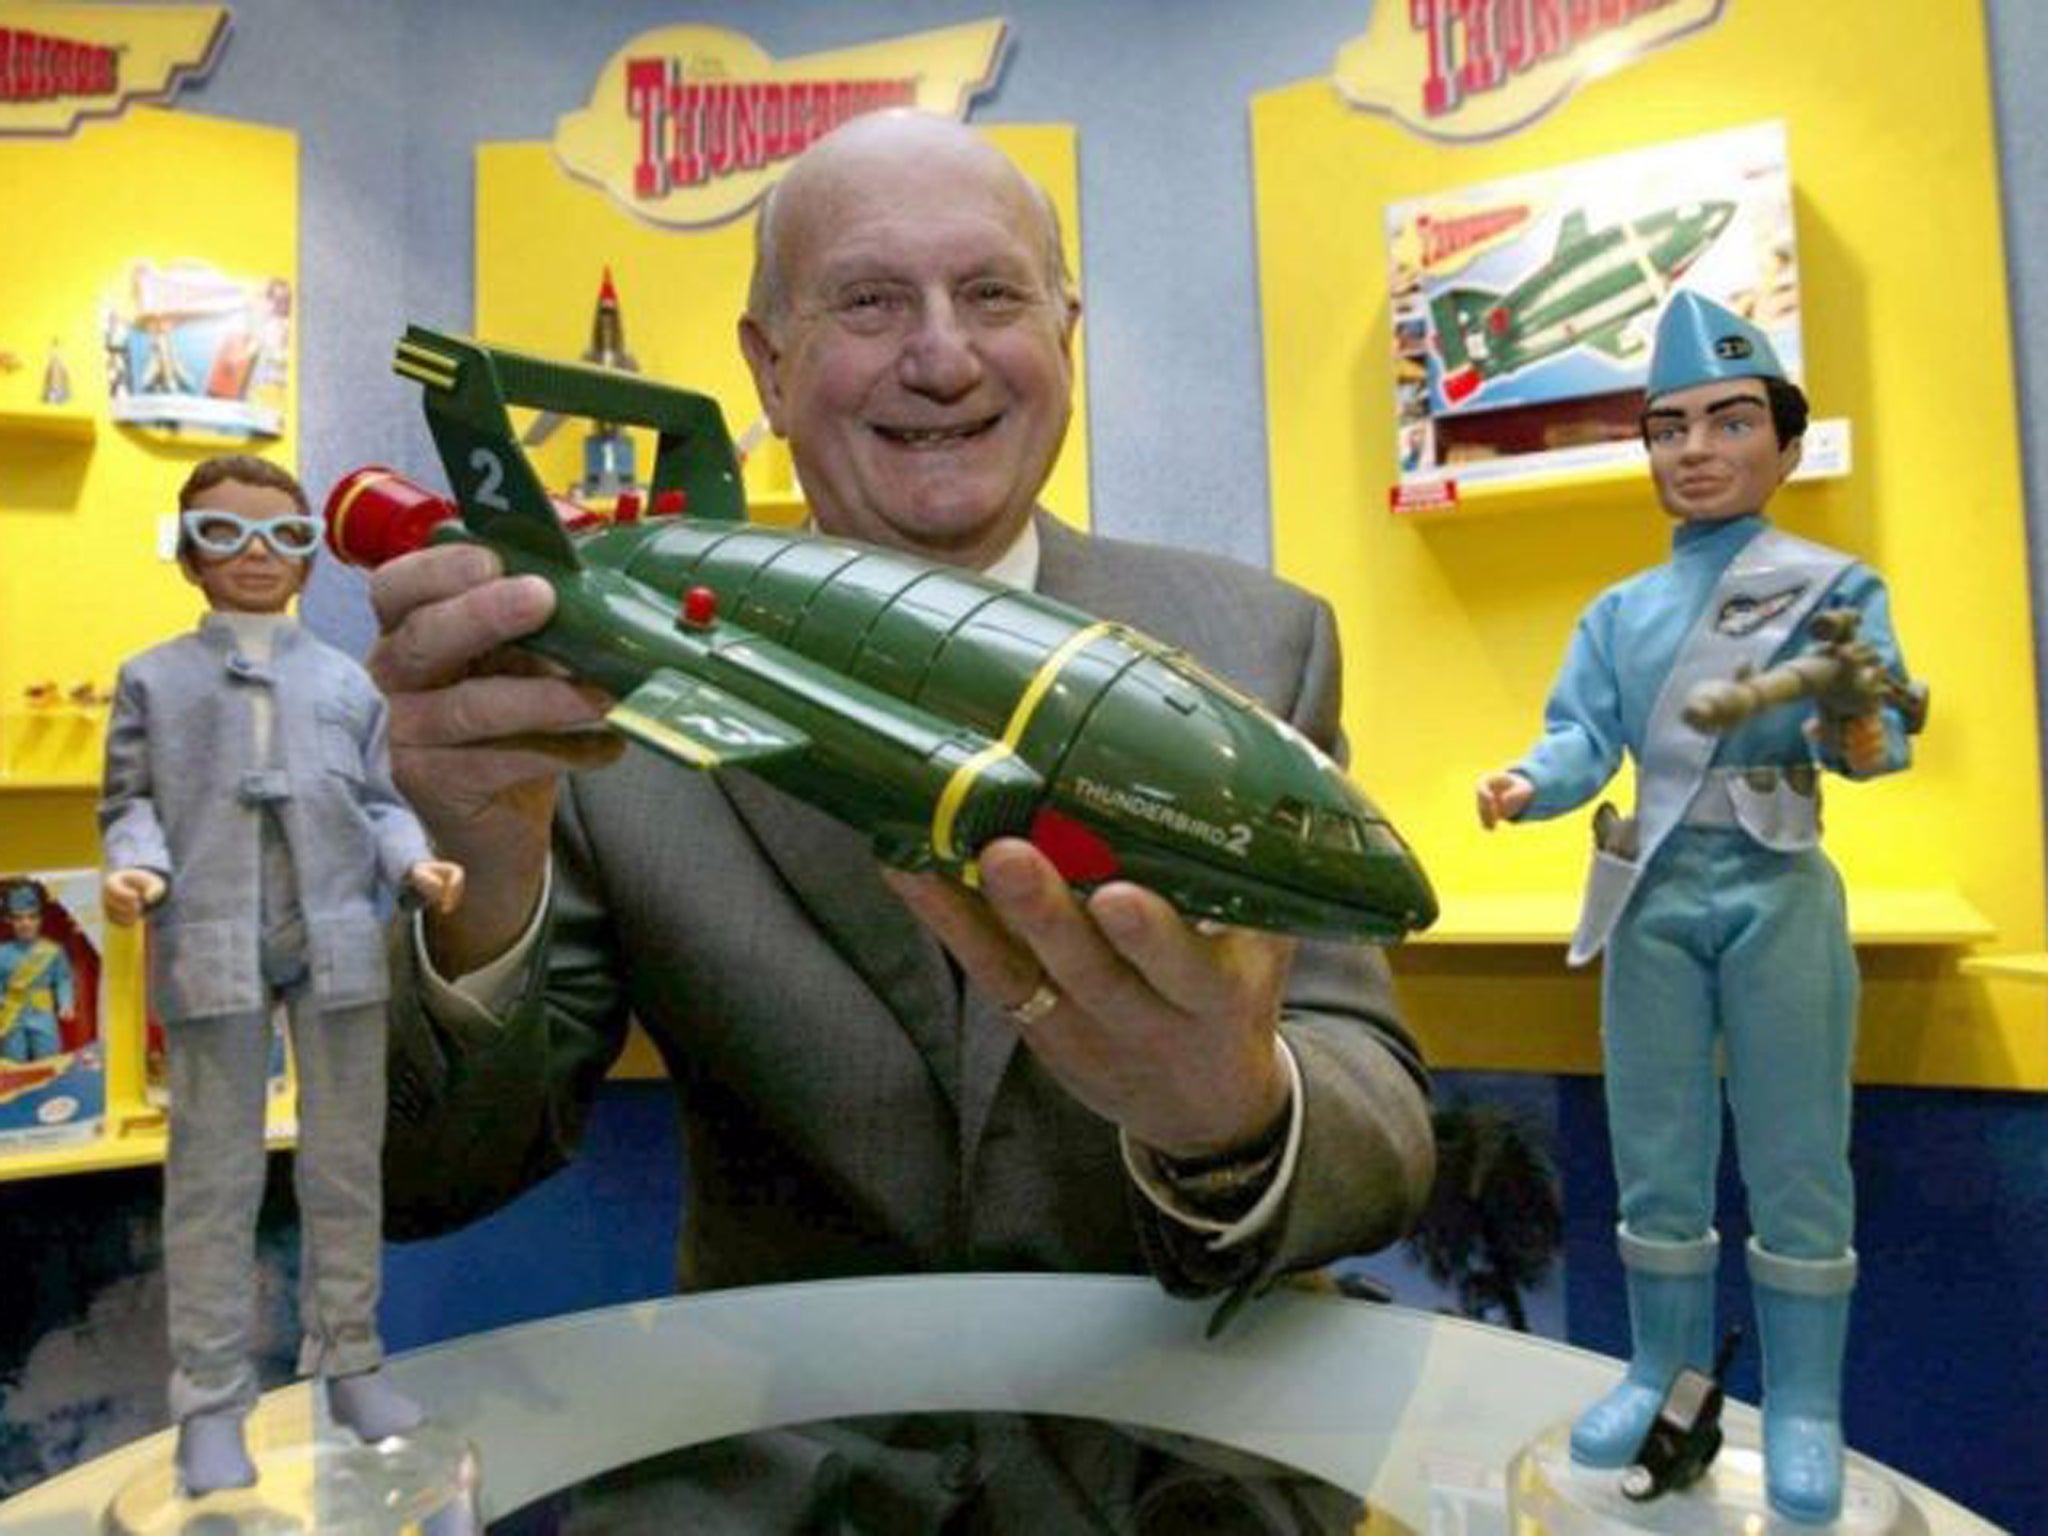 The creator of Thunderbirds, Gerry Anderson holds Thunderbird 2 on the 40th anniversary of the Thunderbirds in 2005